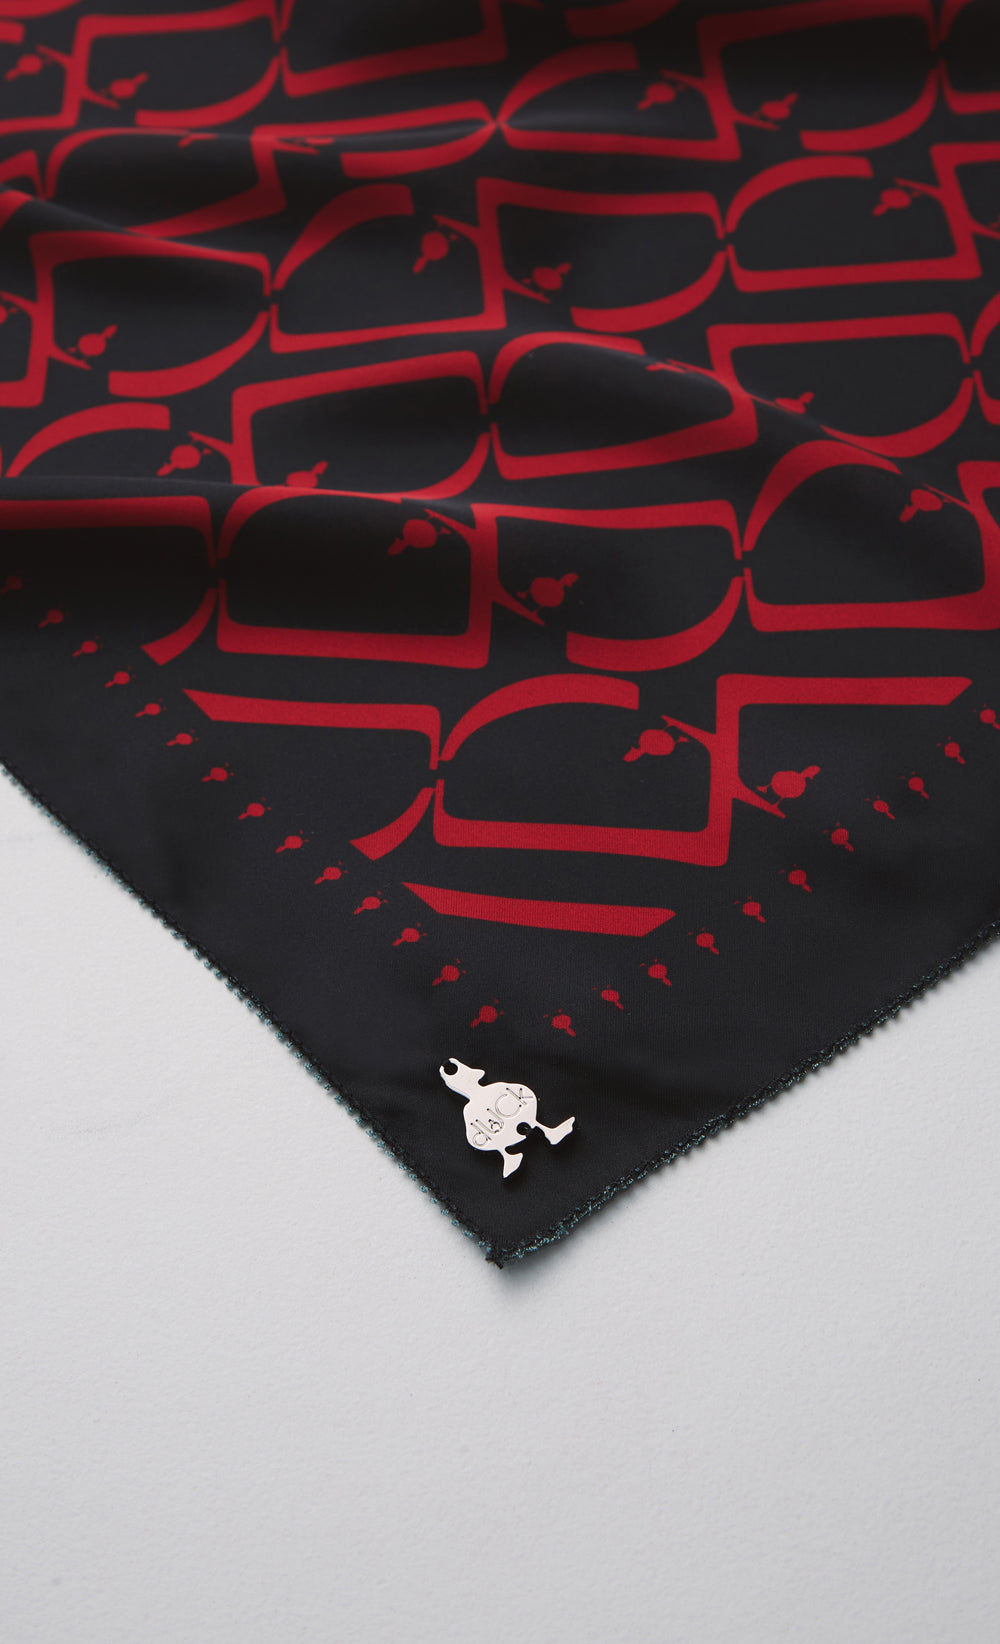 D Monogram dUCk Satin Silk Square Scarf in Red Royale